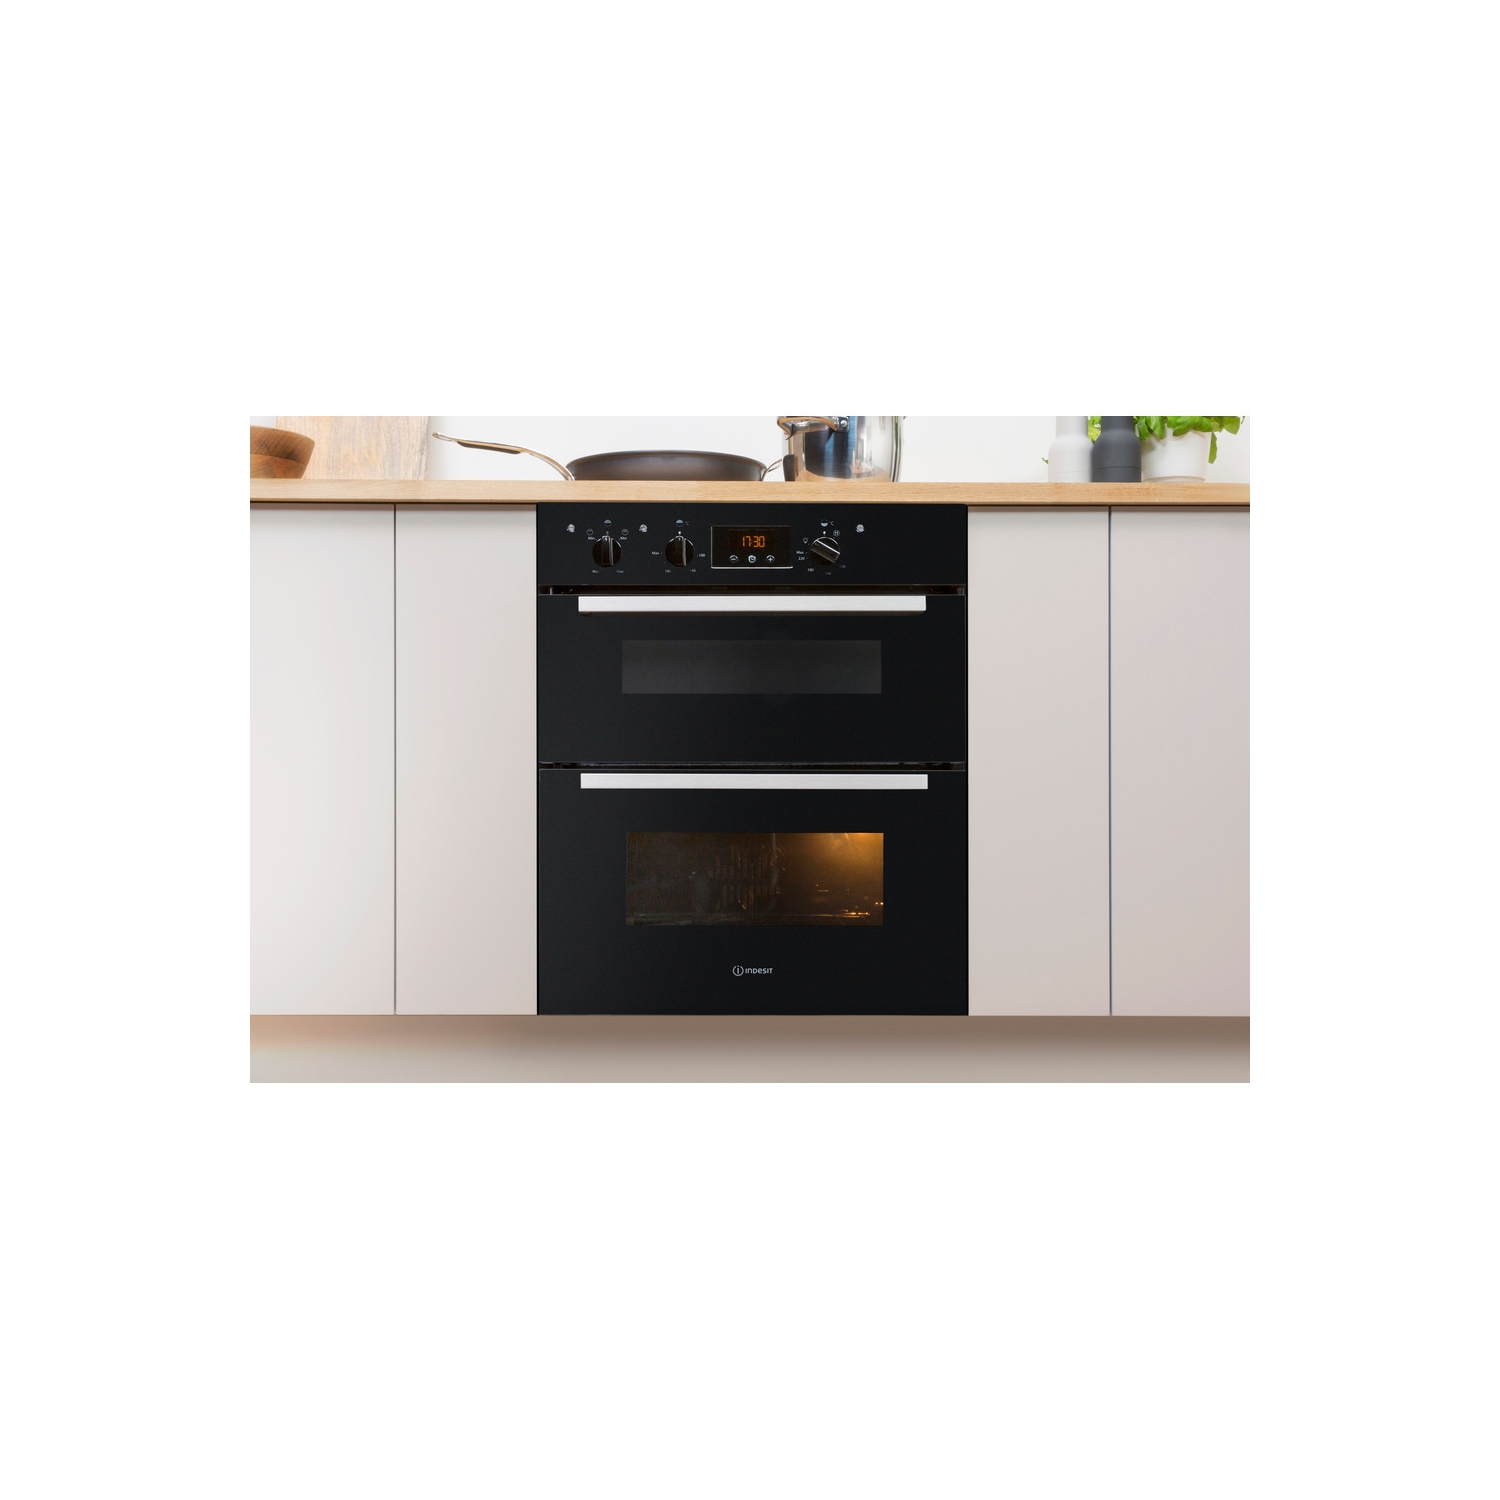 Indesit Built In Electric Double Oven - Black - B Rated - 10